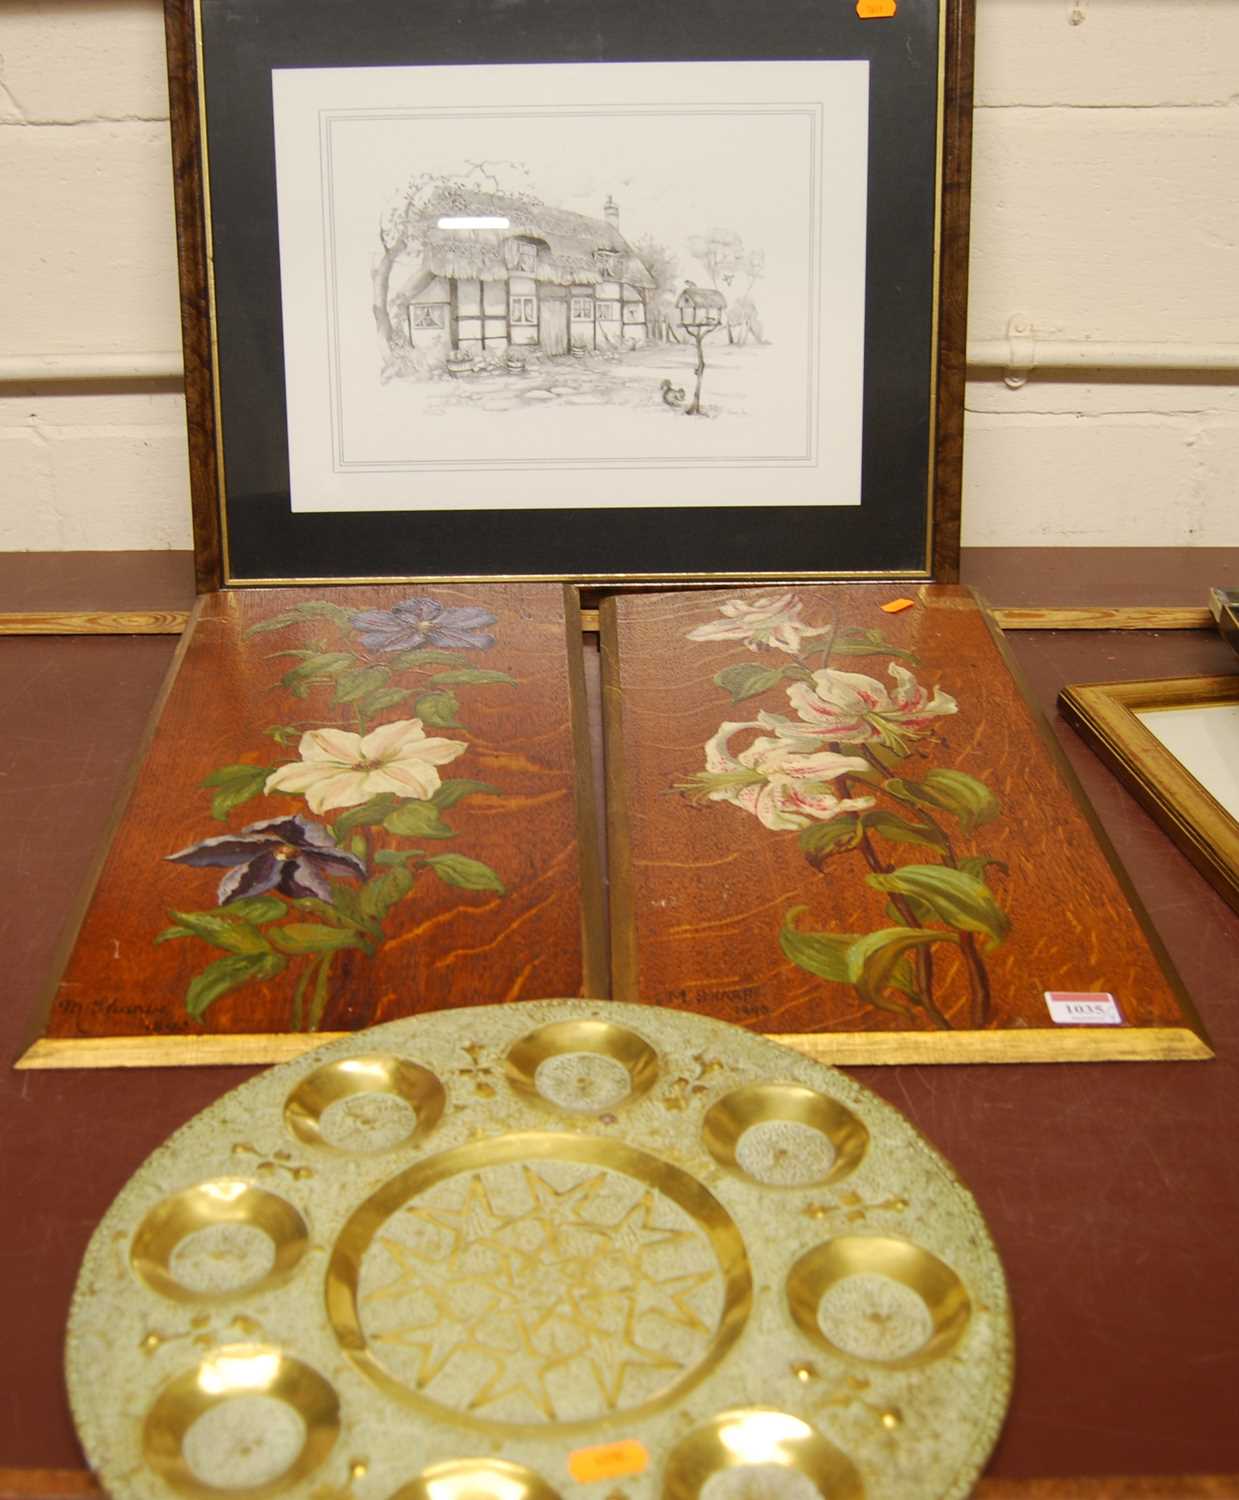 Eastern brass wall hanging, M Sharp - wild flowers, oil on oak panels, each signed and dated lower